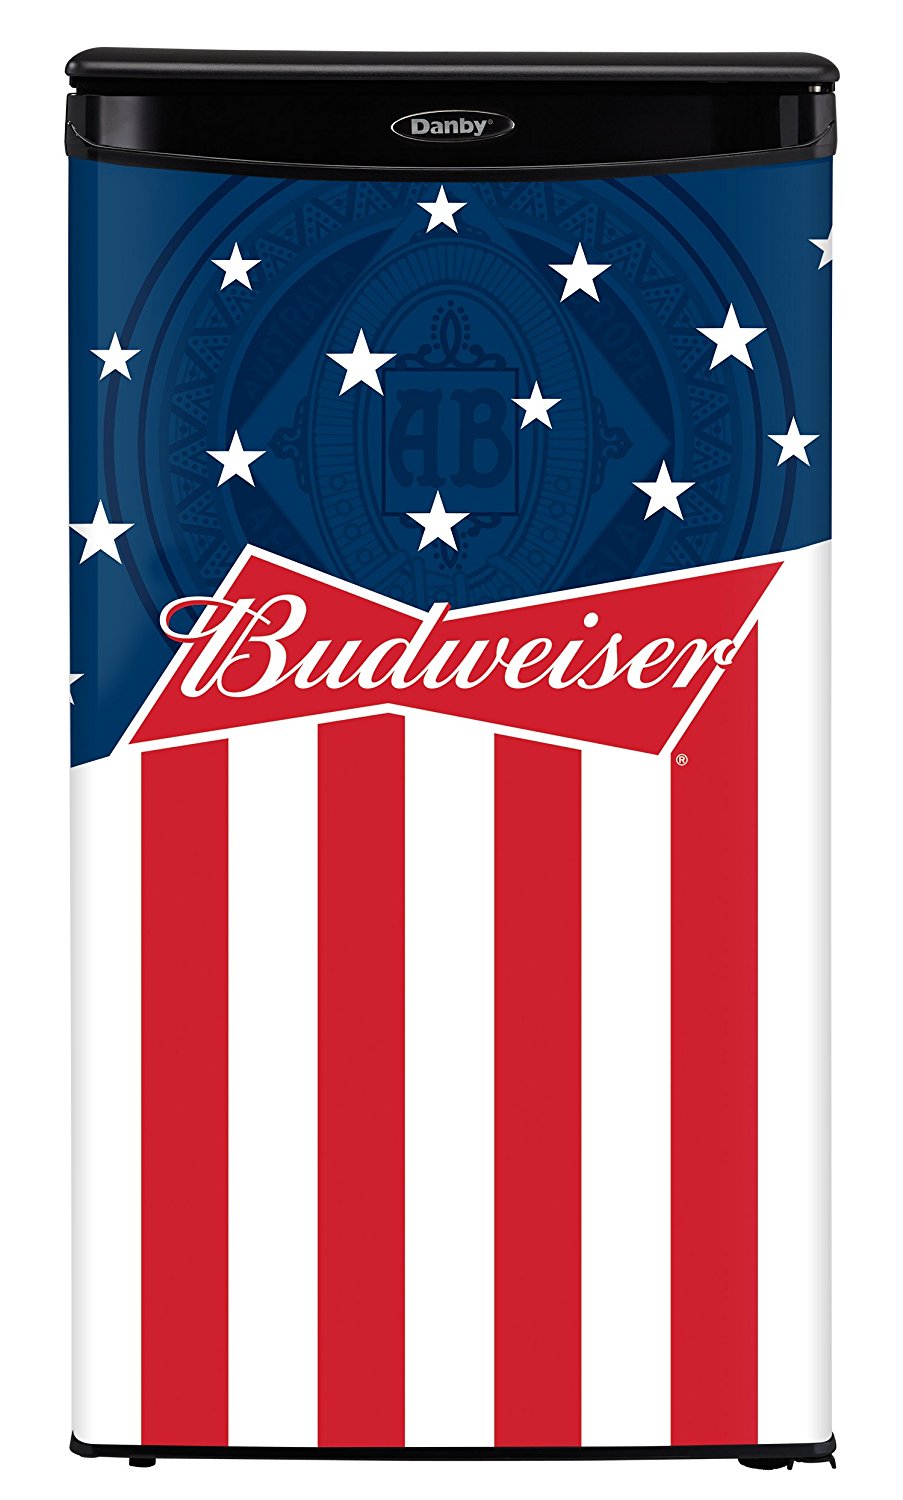 Danby DAR033A1BBUD2 Budweiser 3.3 cu.ft All Refrigerator, Red/White/Blue with Black Cabinet